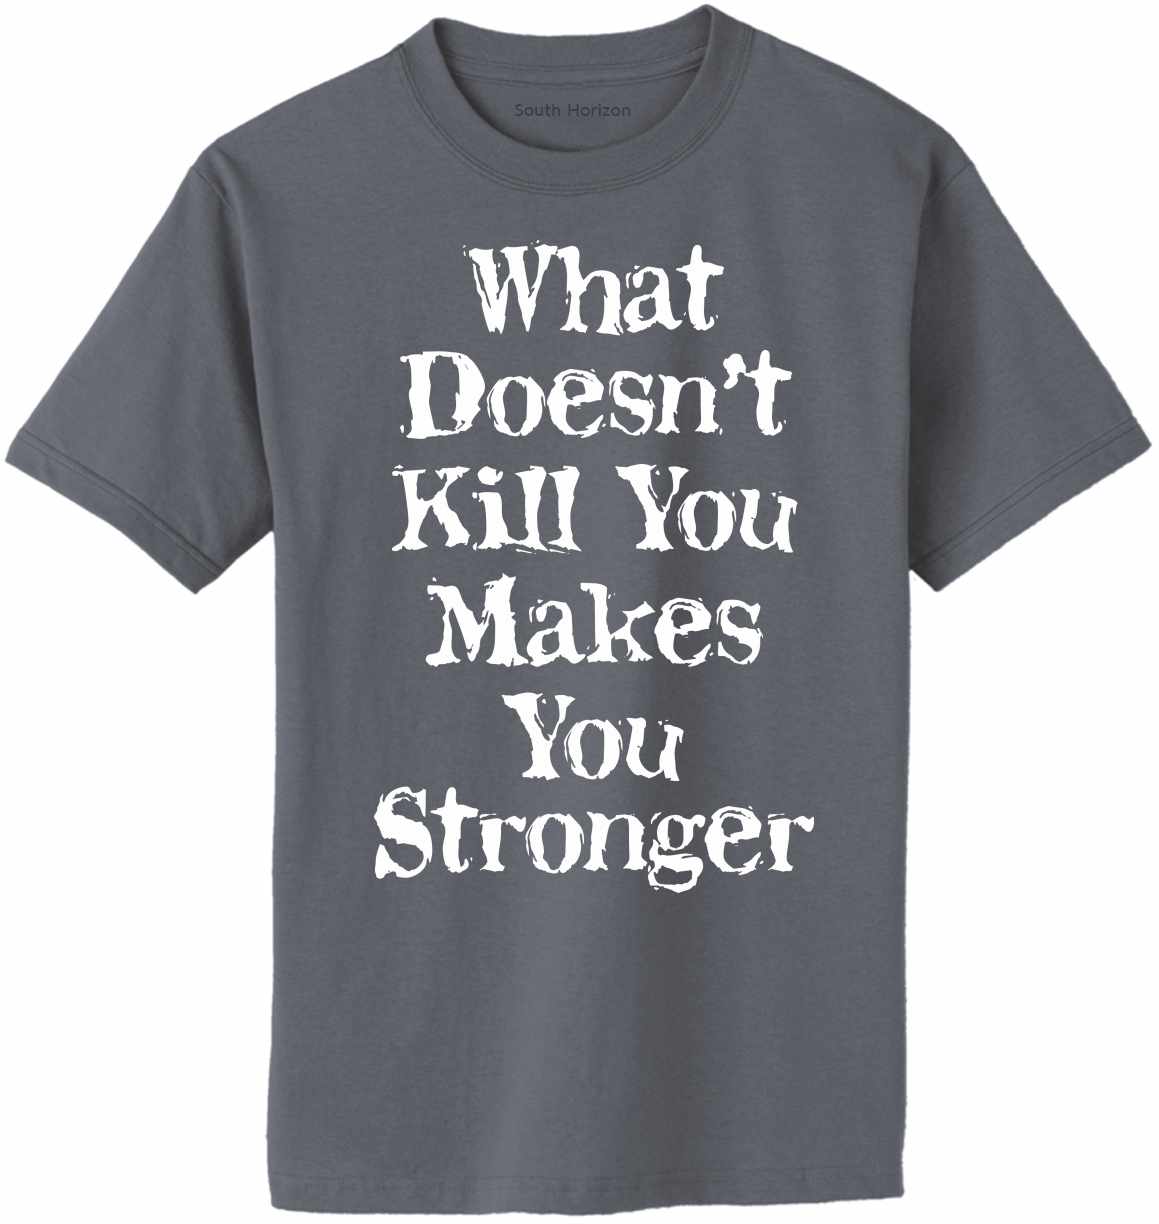 What Doesn't Kill You Makes You Stronger on Adult T-Shirt (#1248-1)